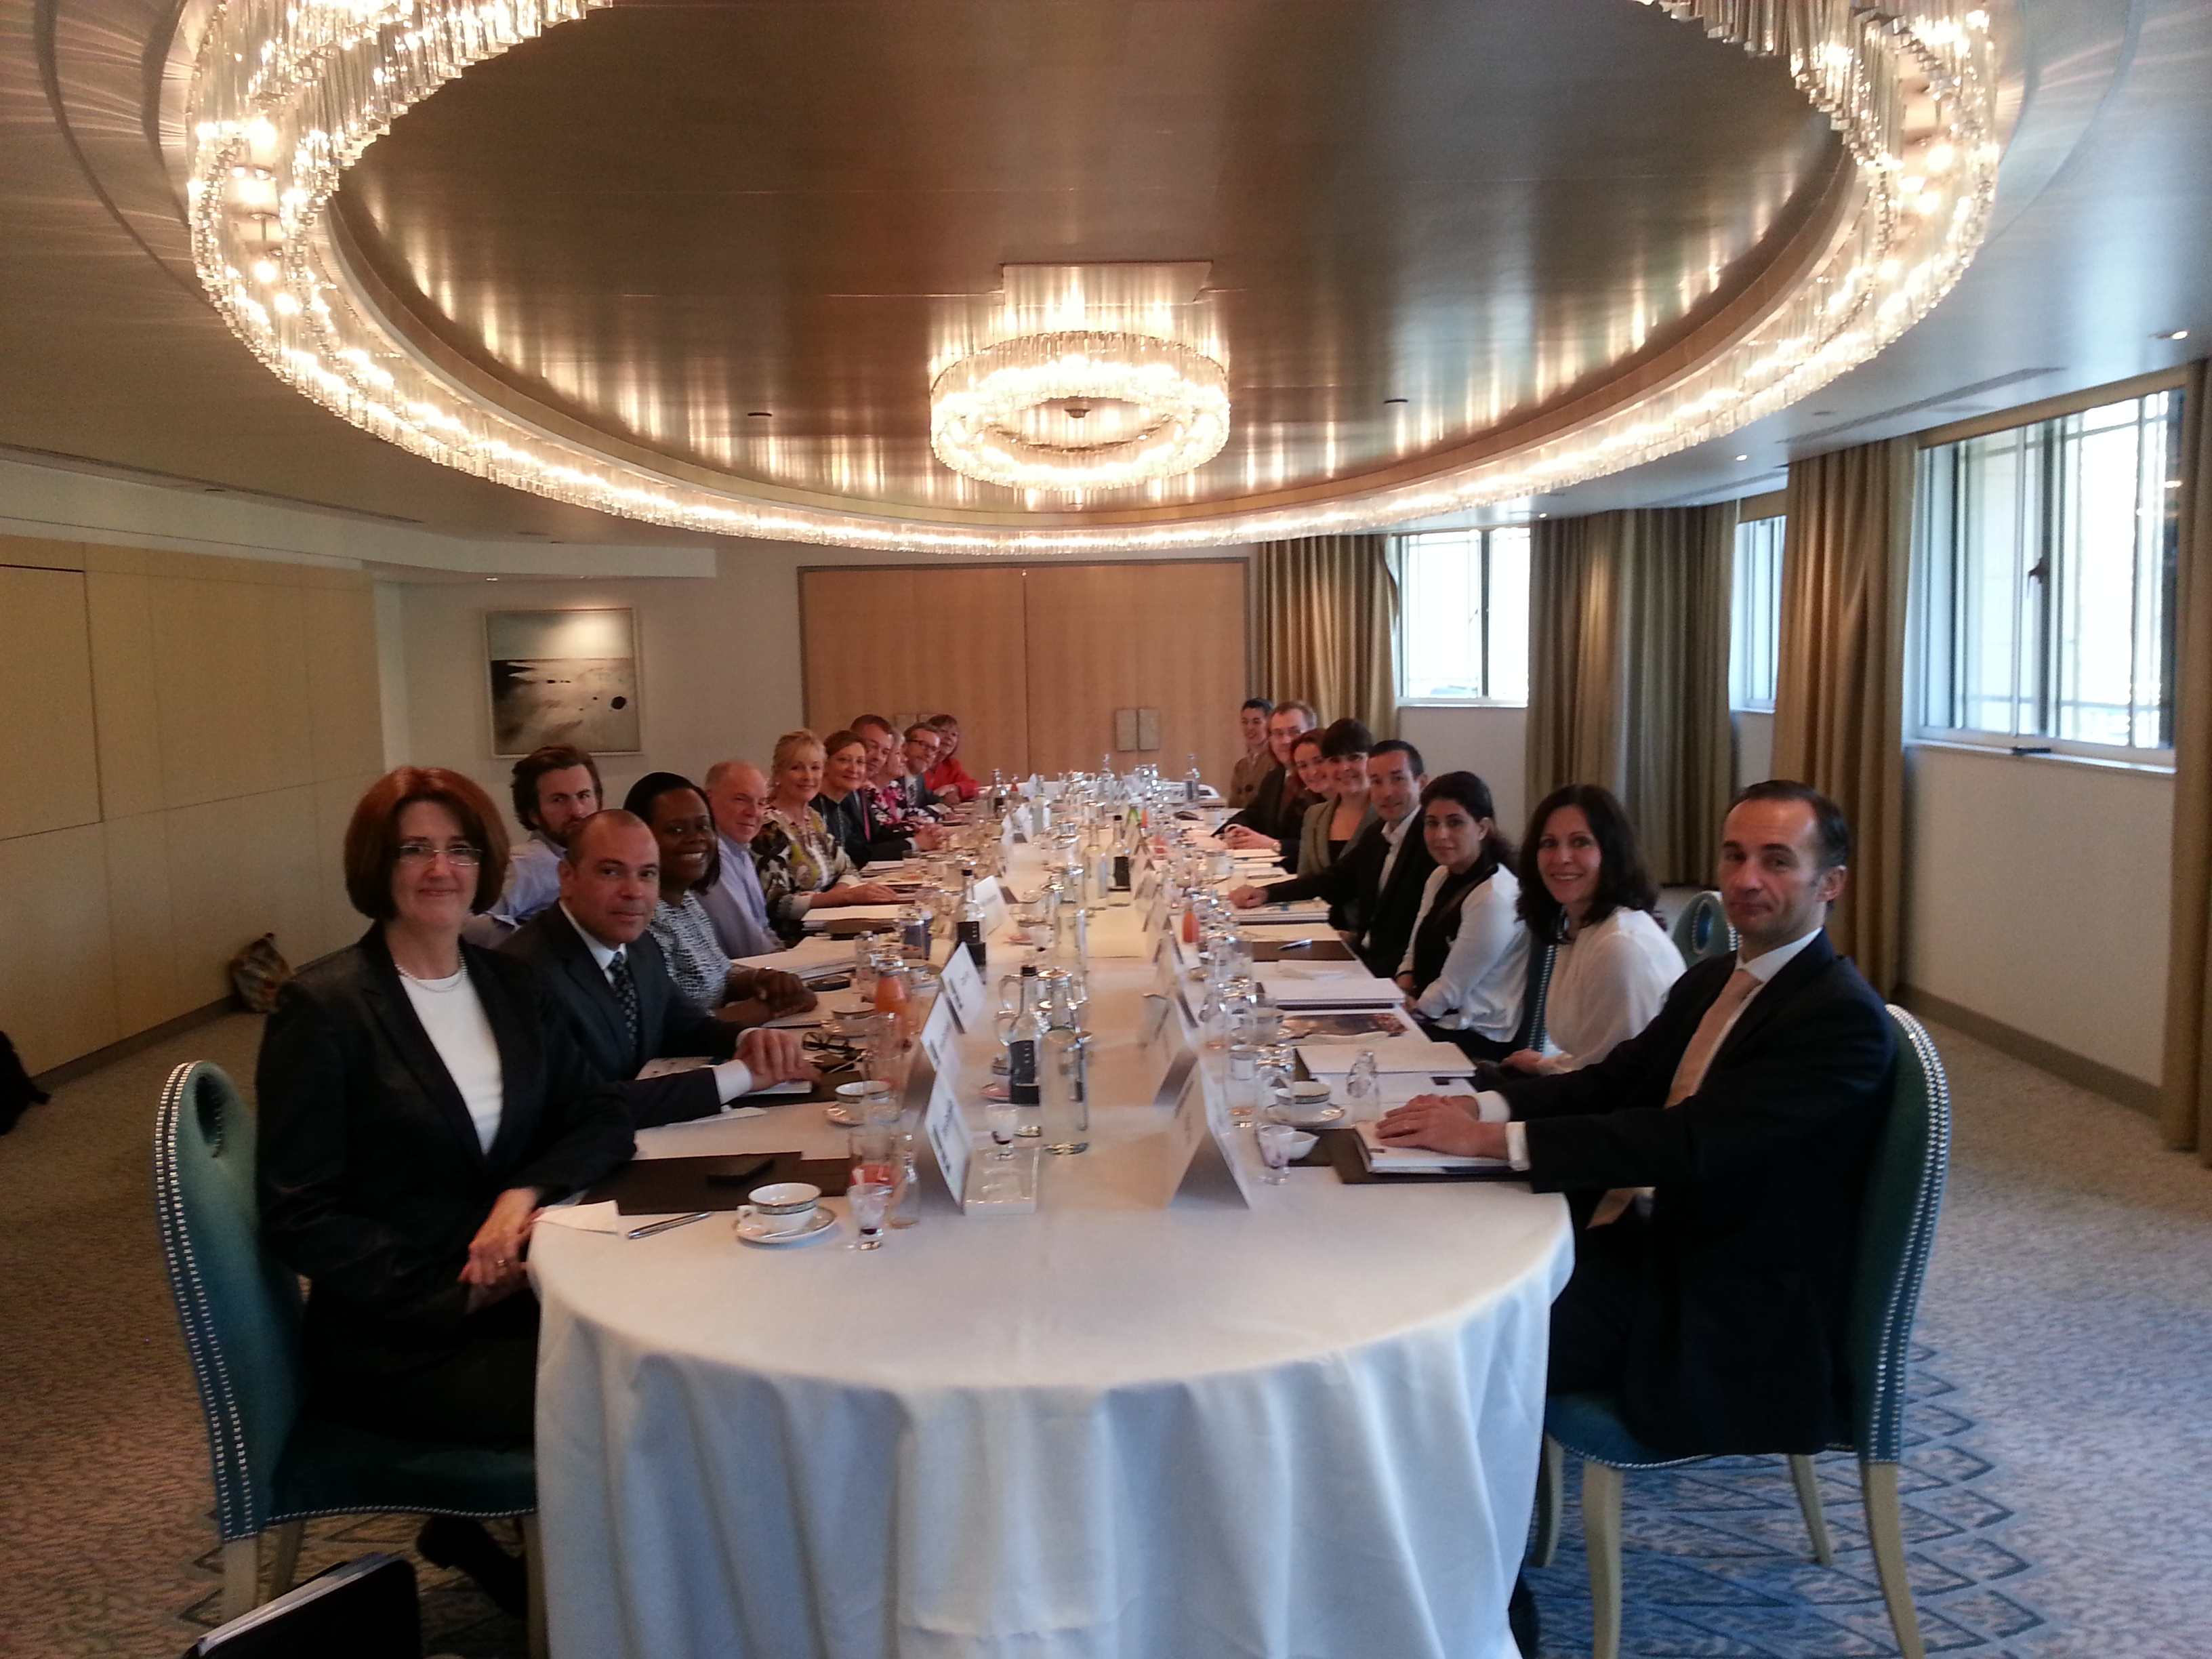 The other side of the table at the first GWTC roundtable at the Dorchester